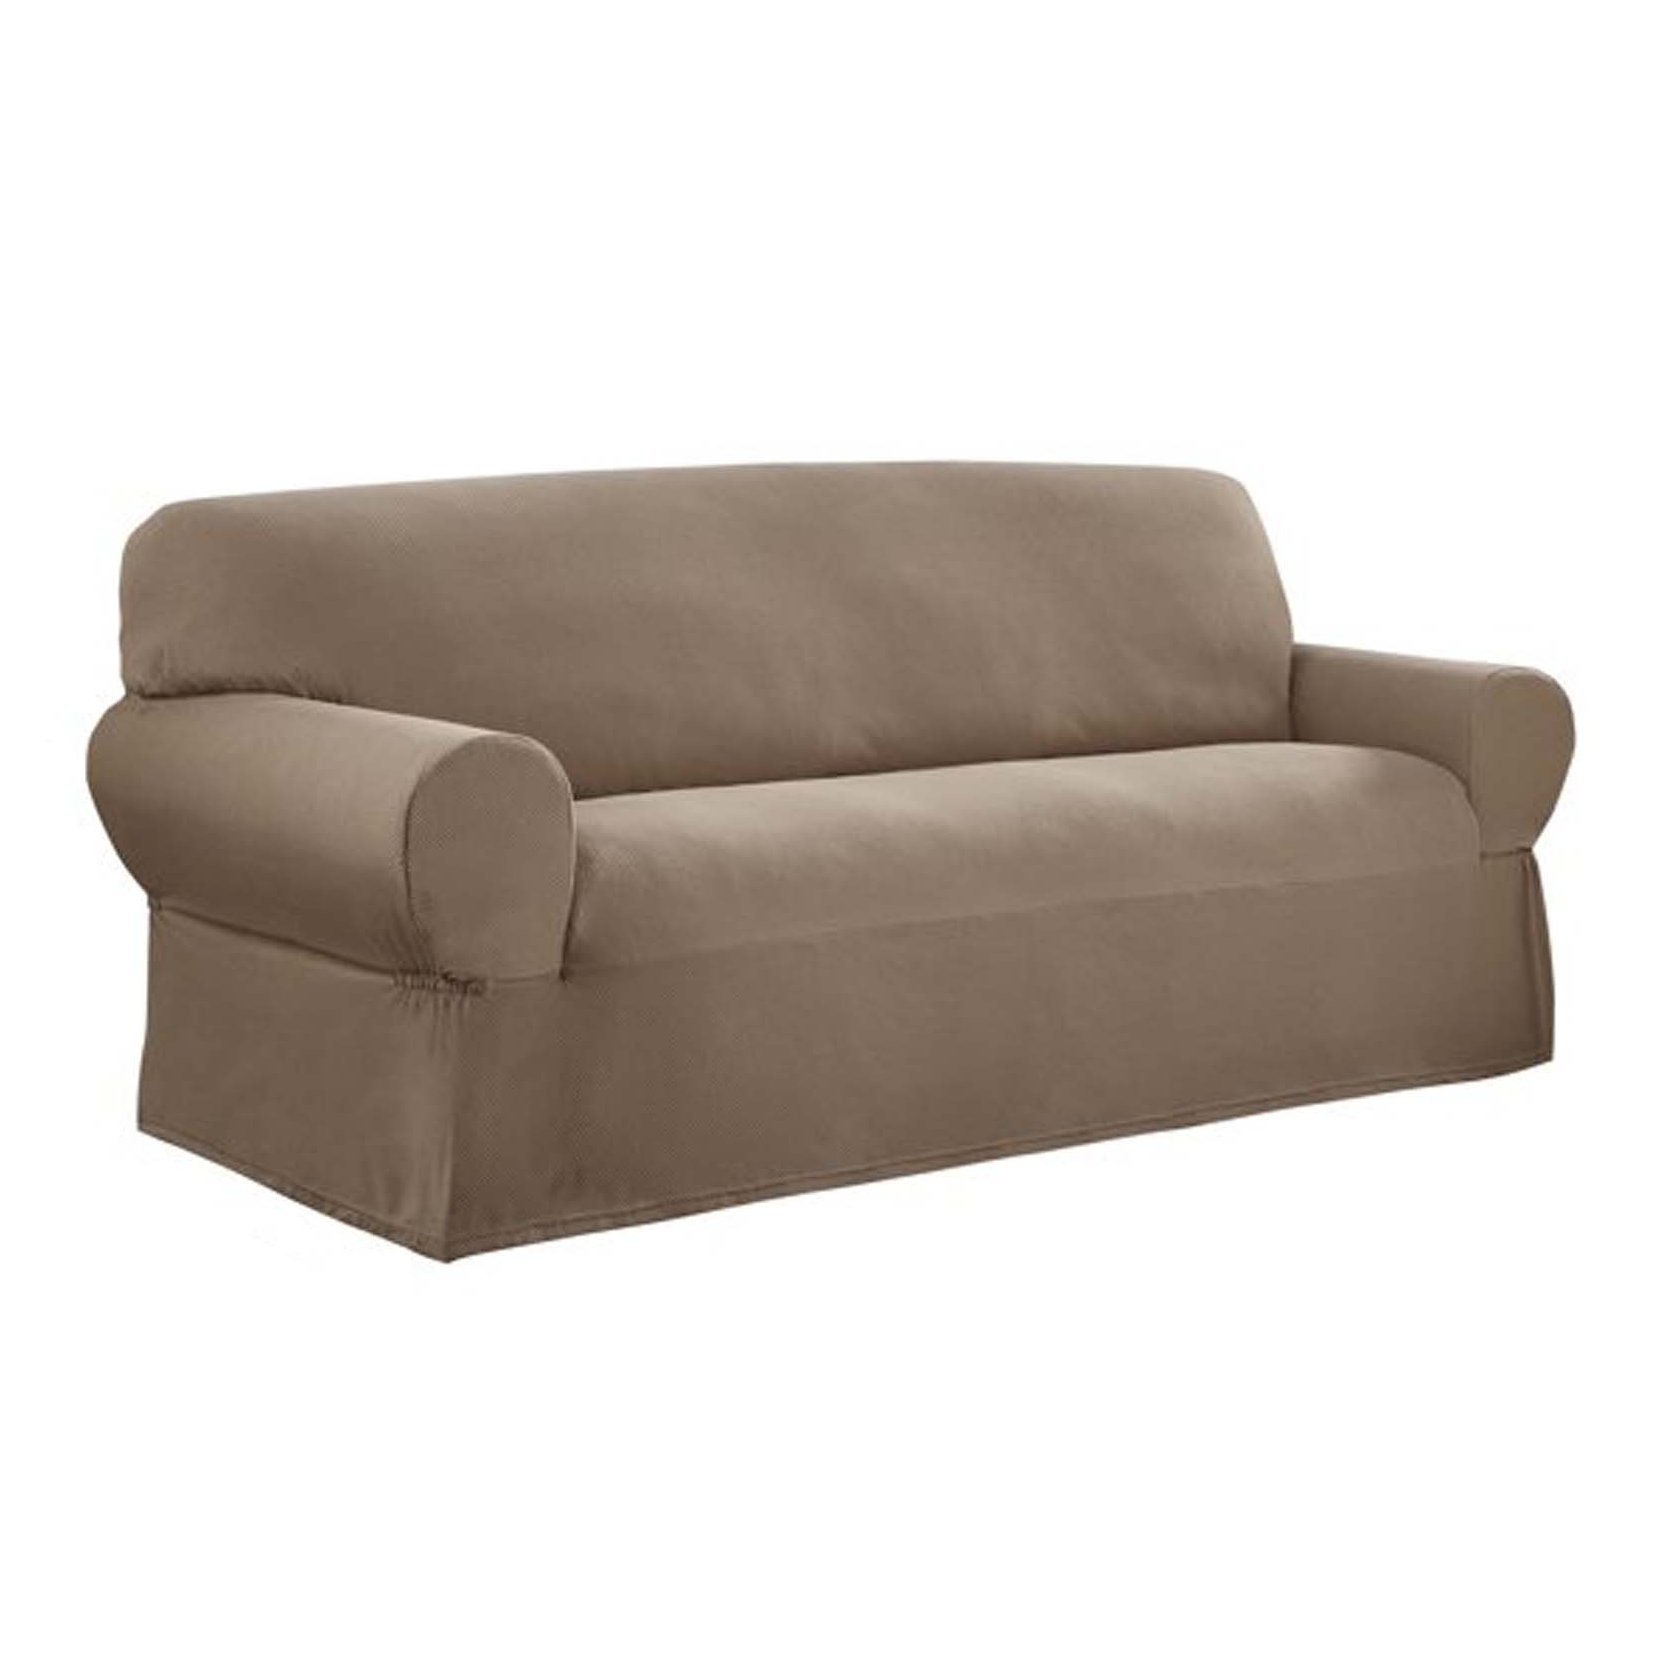 Mainstays Pixel 1-Piece Stretch Sofa Slipcover, Sand - image 1 of 7